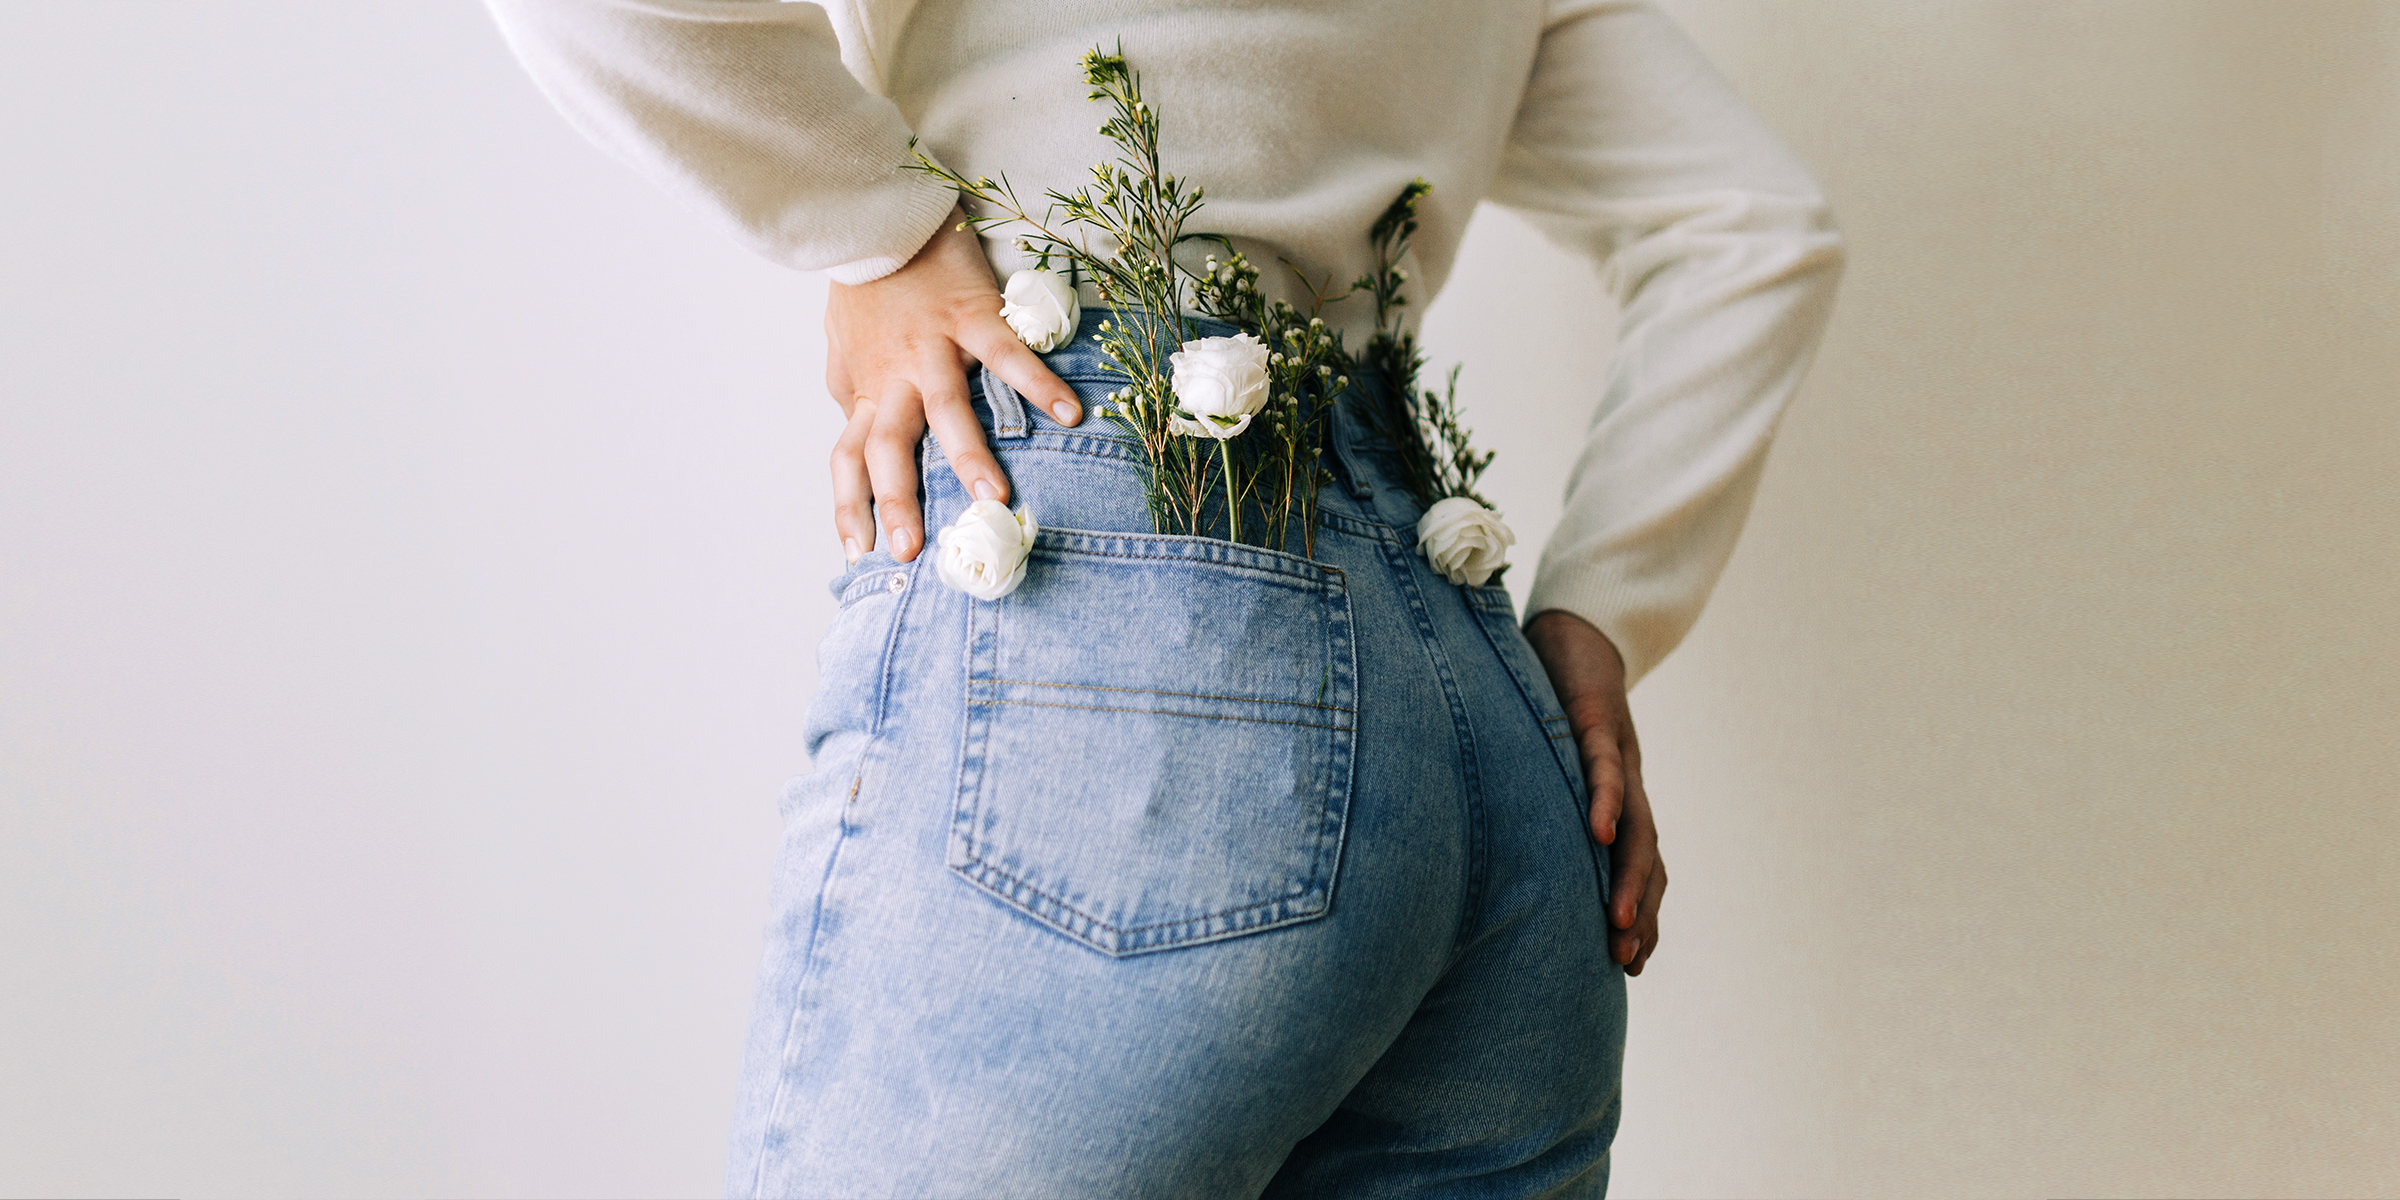 Back view of a woman with flowers in her pocket | Source: Getty Images